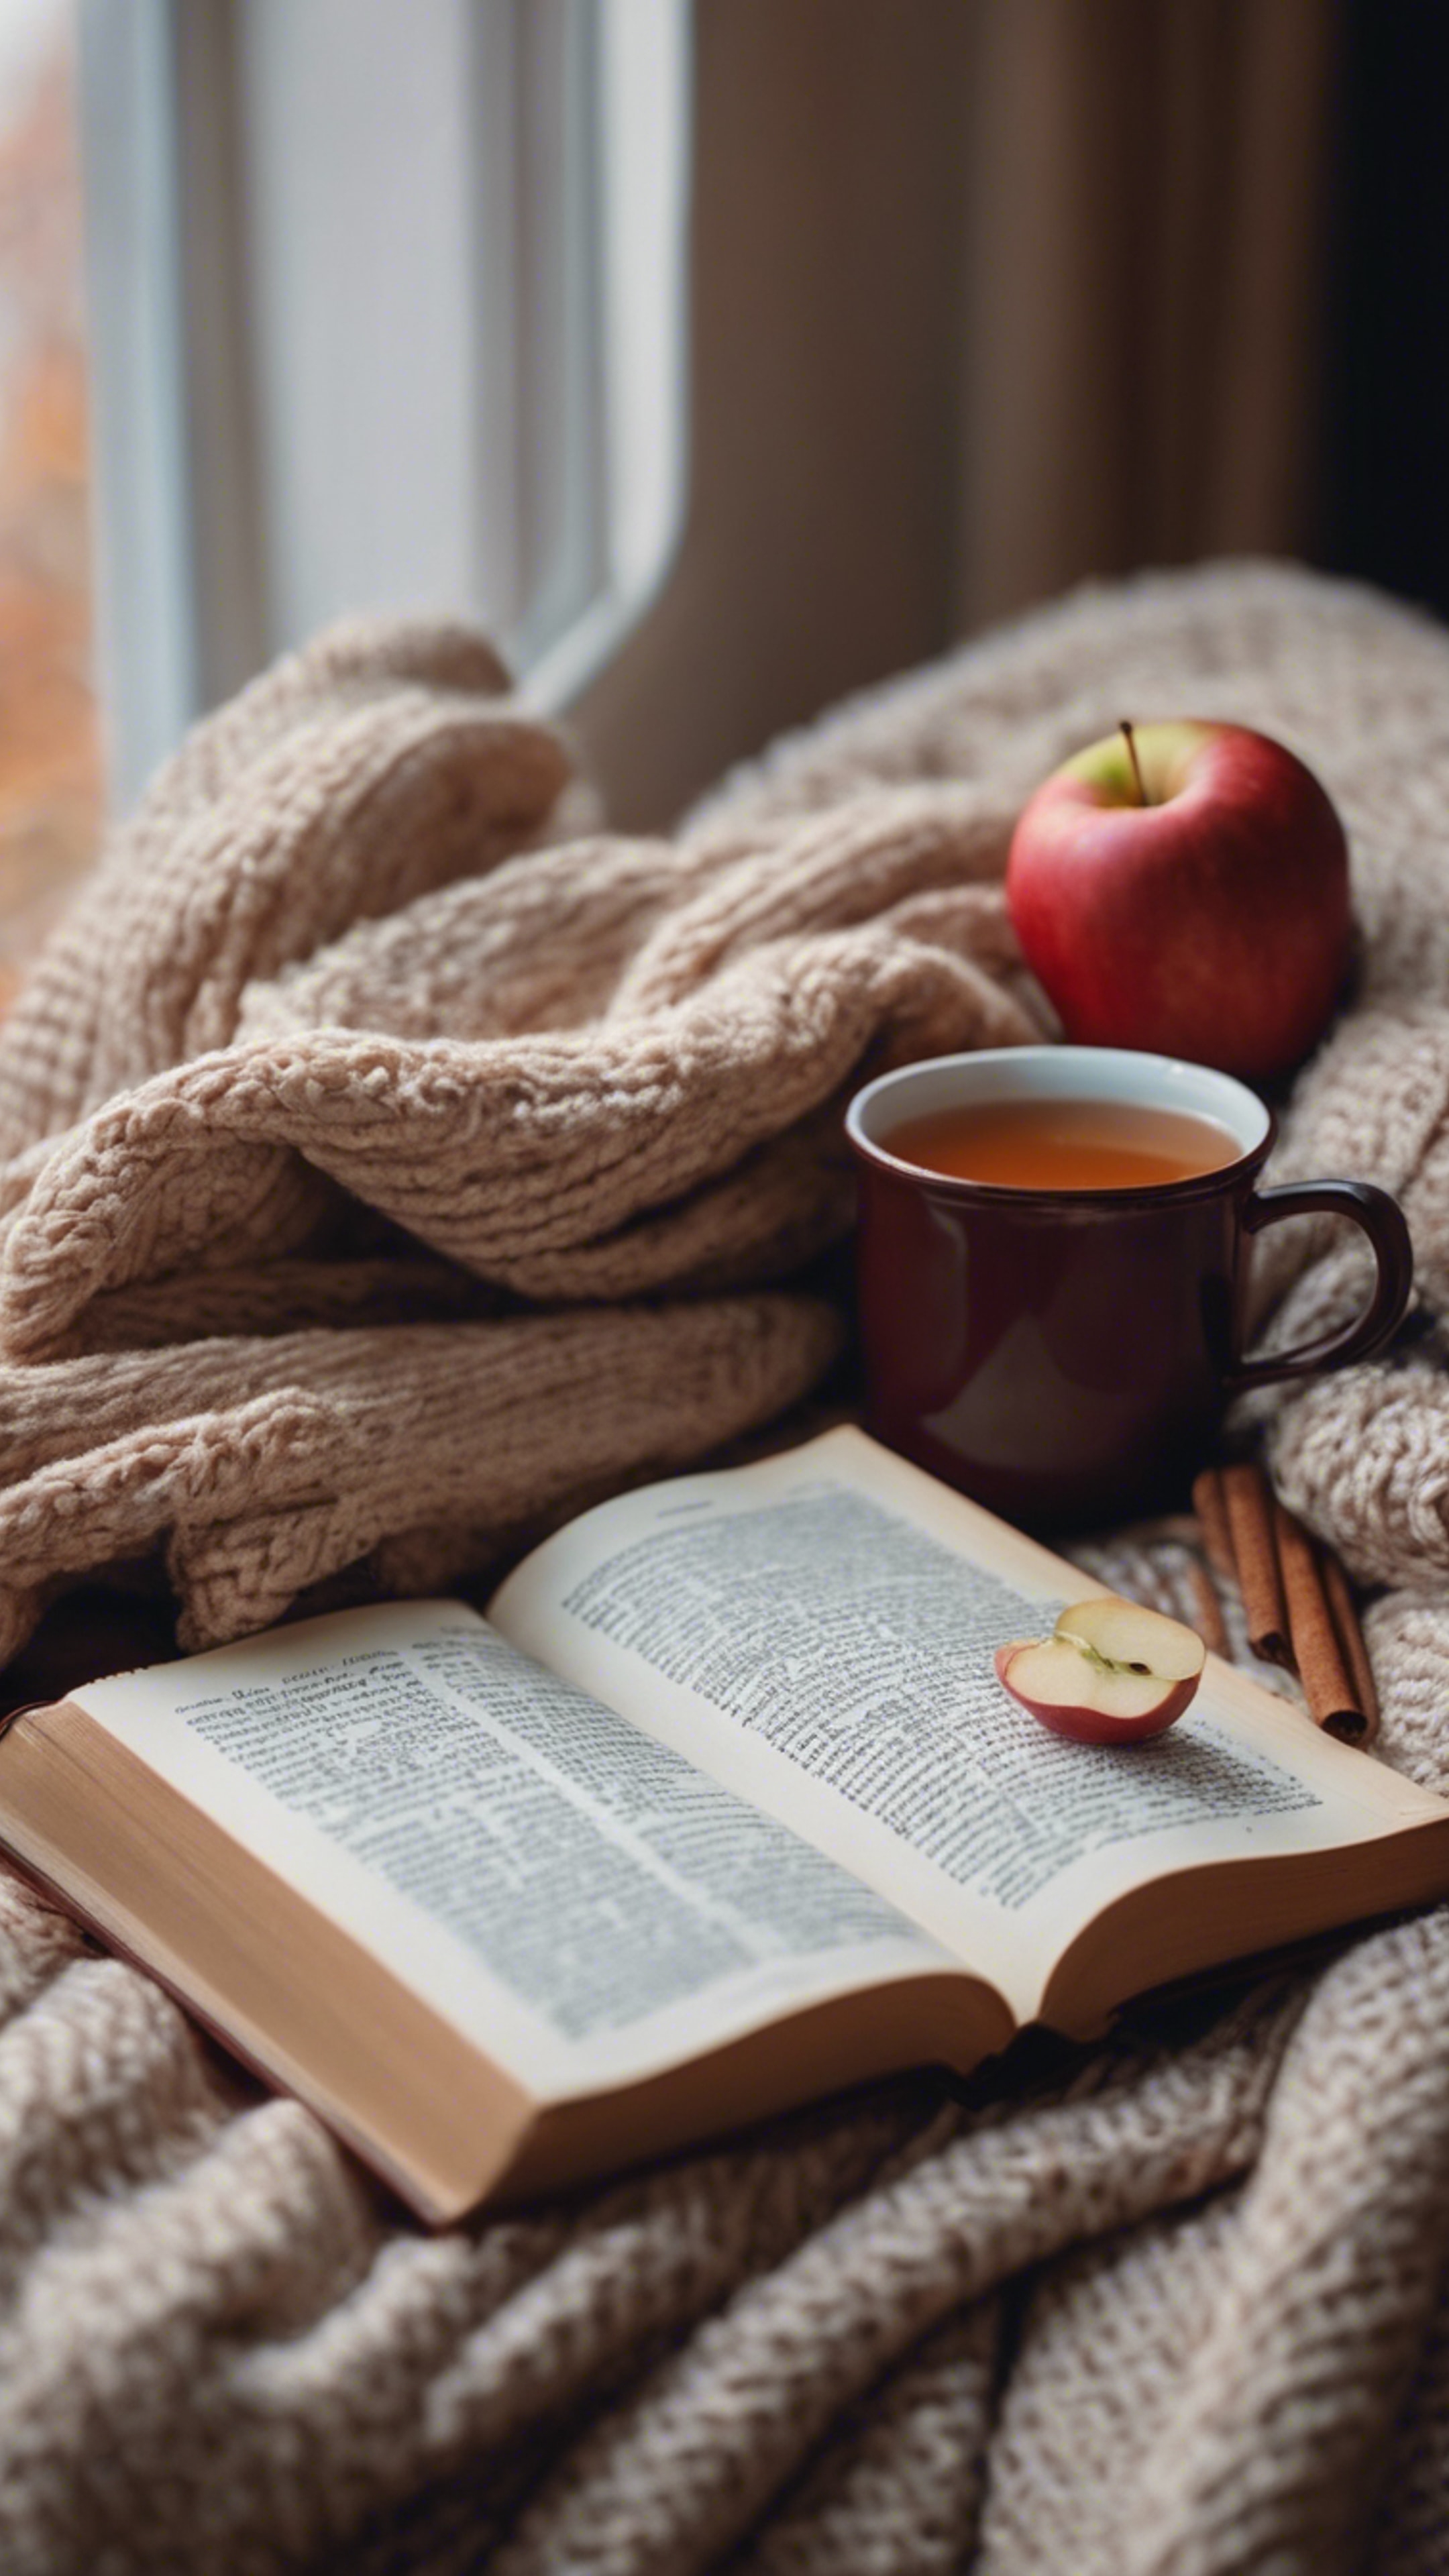 A book with a warm knit blanket and a cup of hot apple cider against the backdrop of a rainy autumn afternoon. Wallpaper[8a0d8609209e414cbfa7]